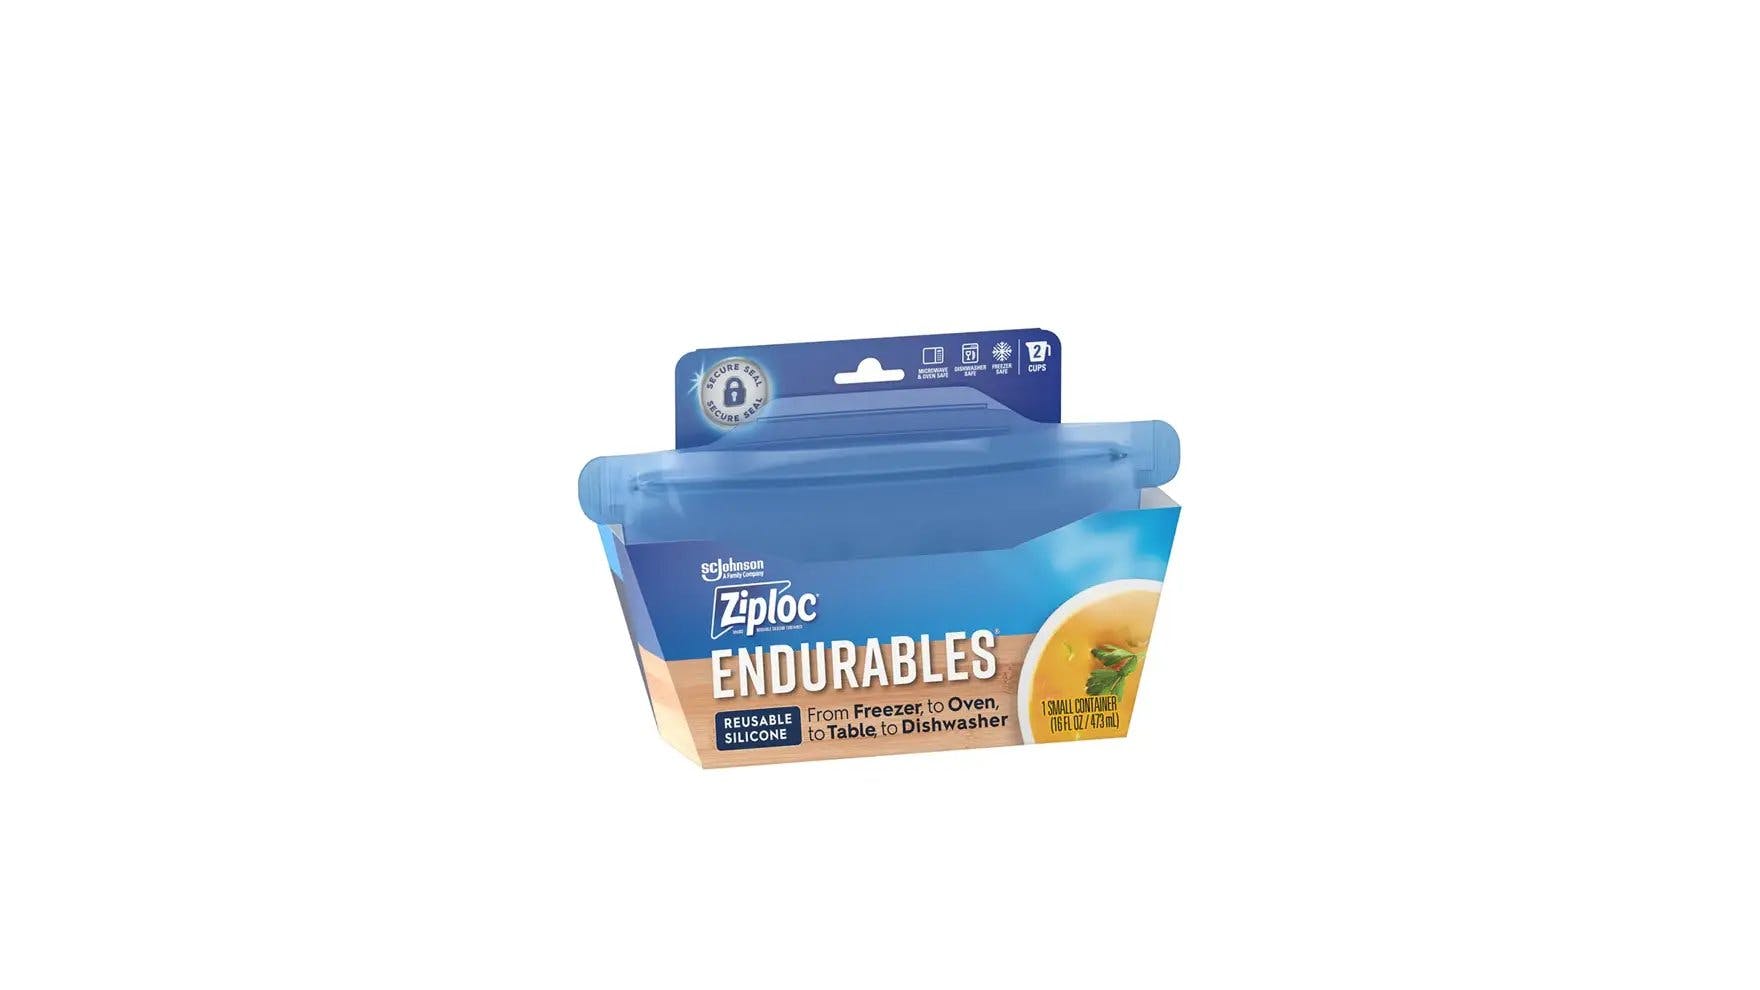 Front of Ziploc Endurables small container packaging.